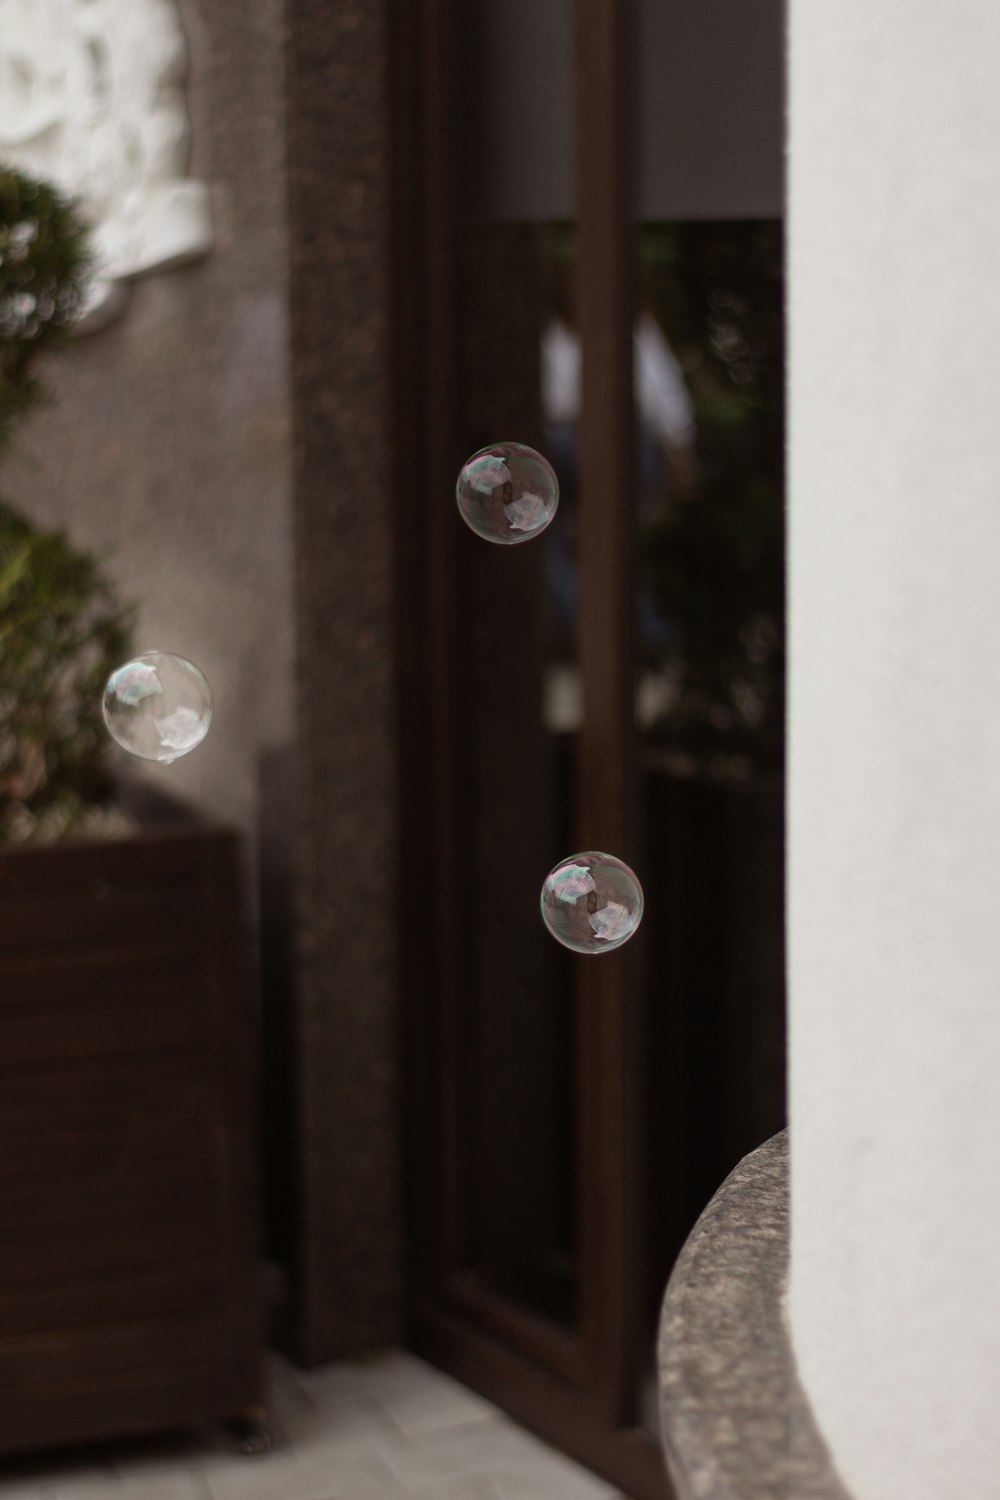 a group of bubbles floating in the air